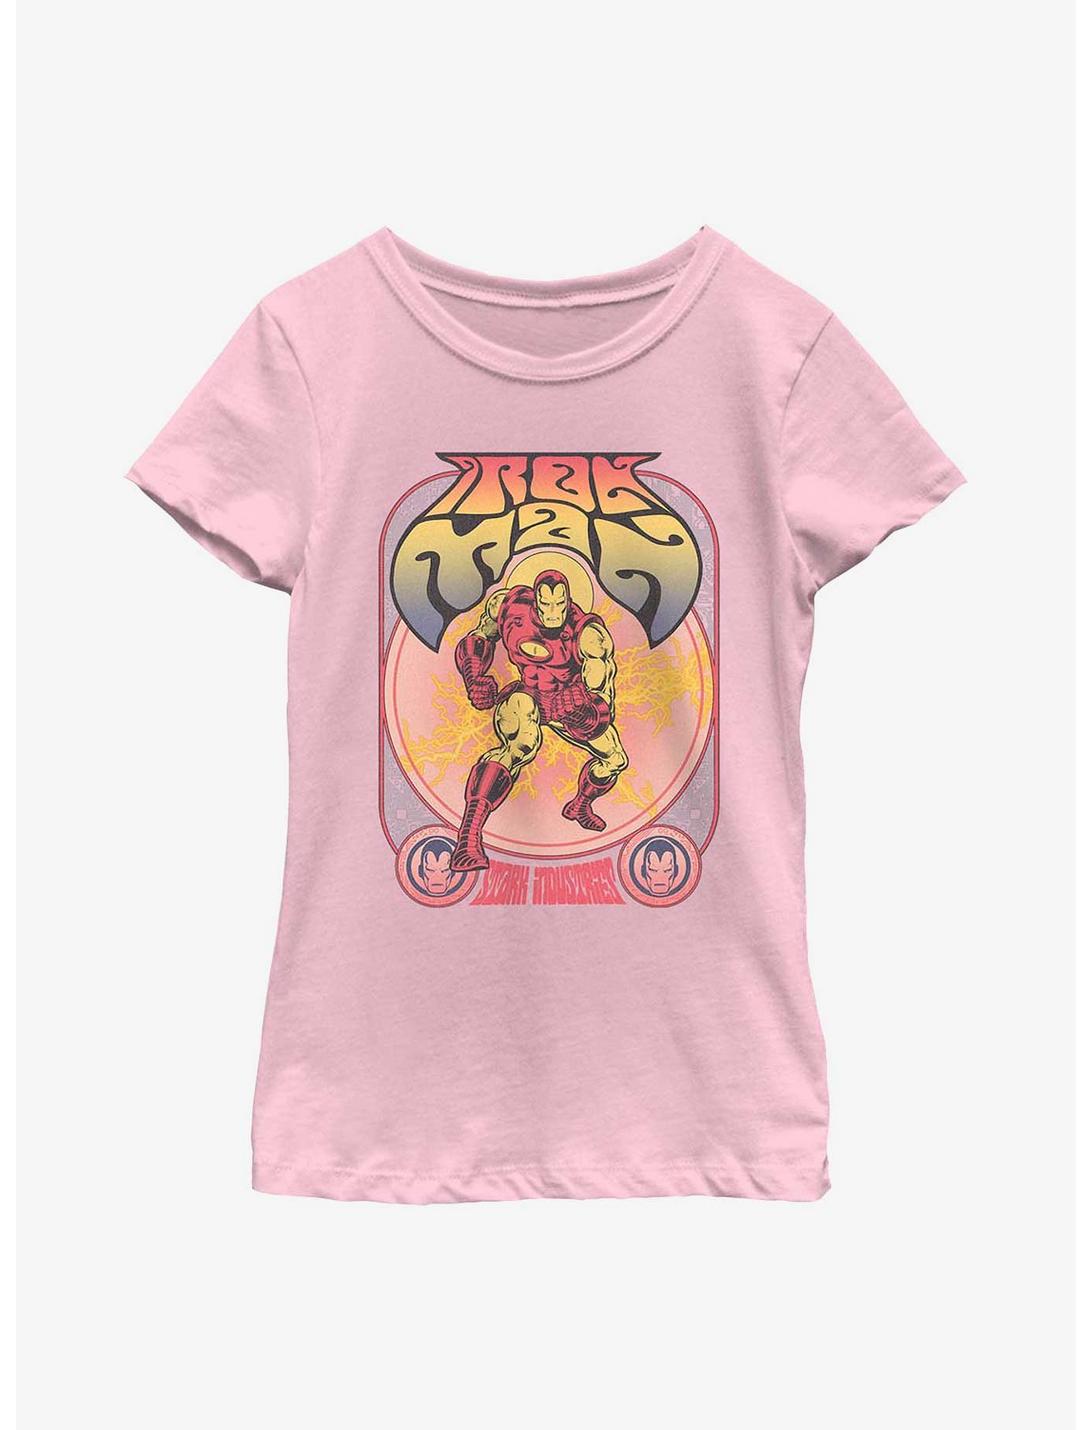 Marvel Iron Man Groovy Youth Girls T-Shirt, PINK, hi-res